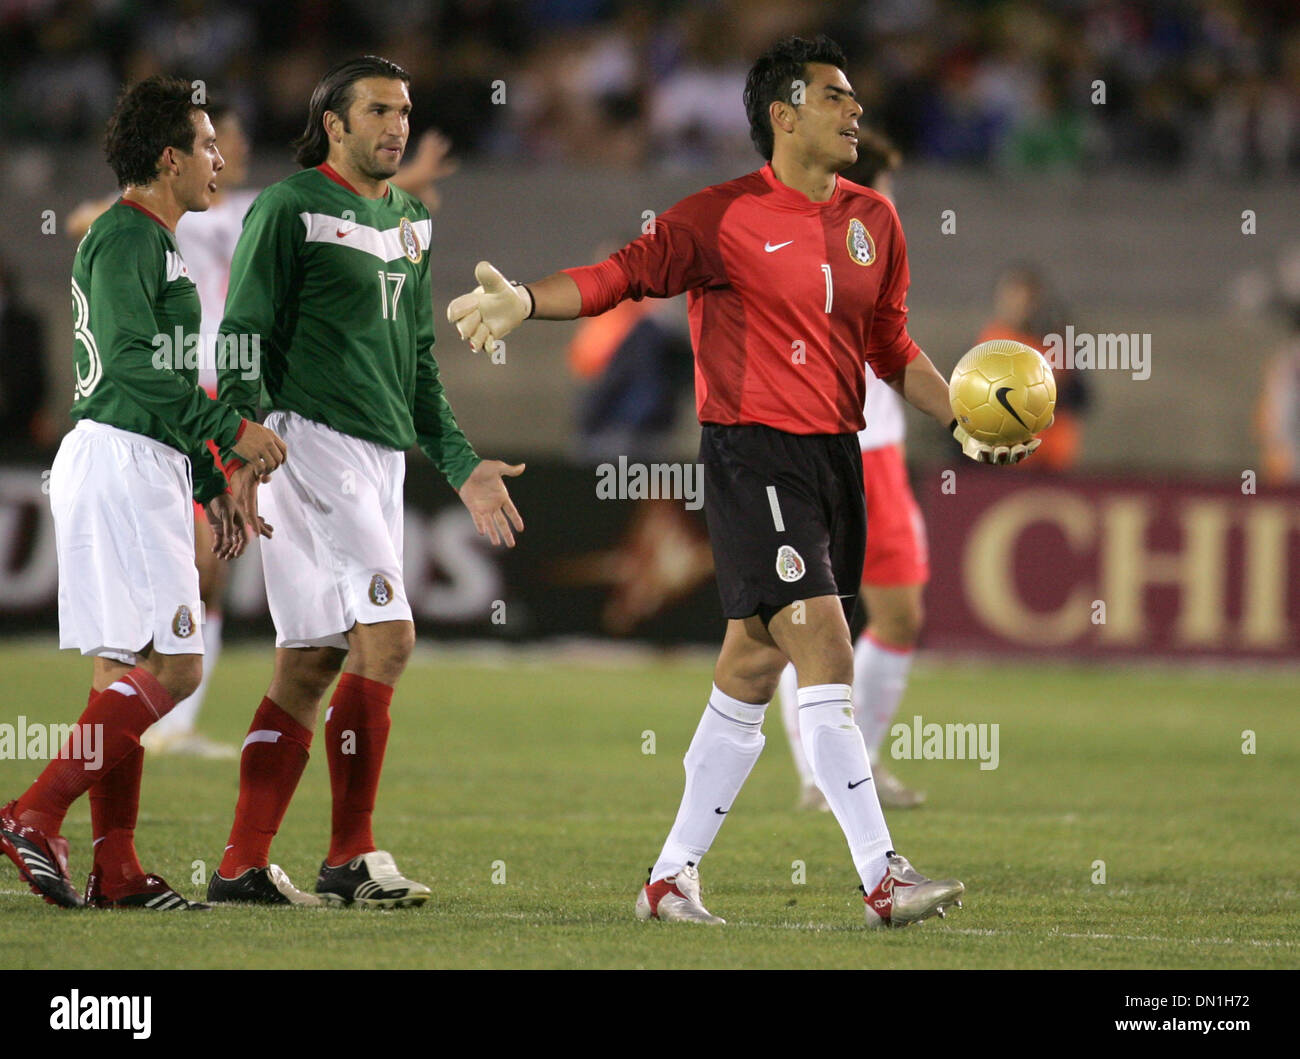 Feb 15, 2006; Los Angeles, CA, USA; SOCCER: Goalie (1) Oswaldo Sanchez of the National Team of Mexico  handles the ball as team mates look on during their tune up match prior to the world cup at the Los Angeles Memorial Coliseum Wednesday 15 February 2006. Korea won the game 1-0. Mandatory Credit: Photo by Armando Arorizo/ZUMA Press. (©) Copyright 2006 by Armando Arorizo Stock Photo